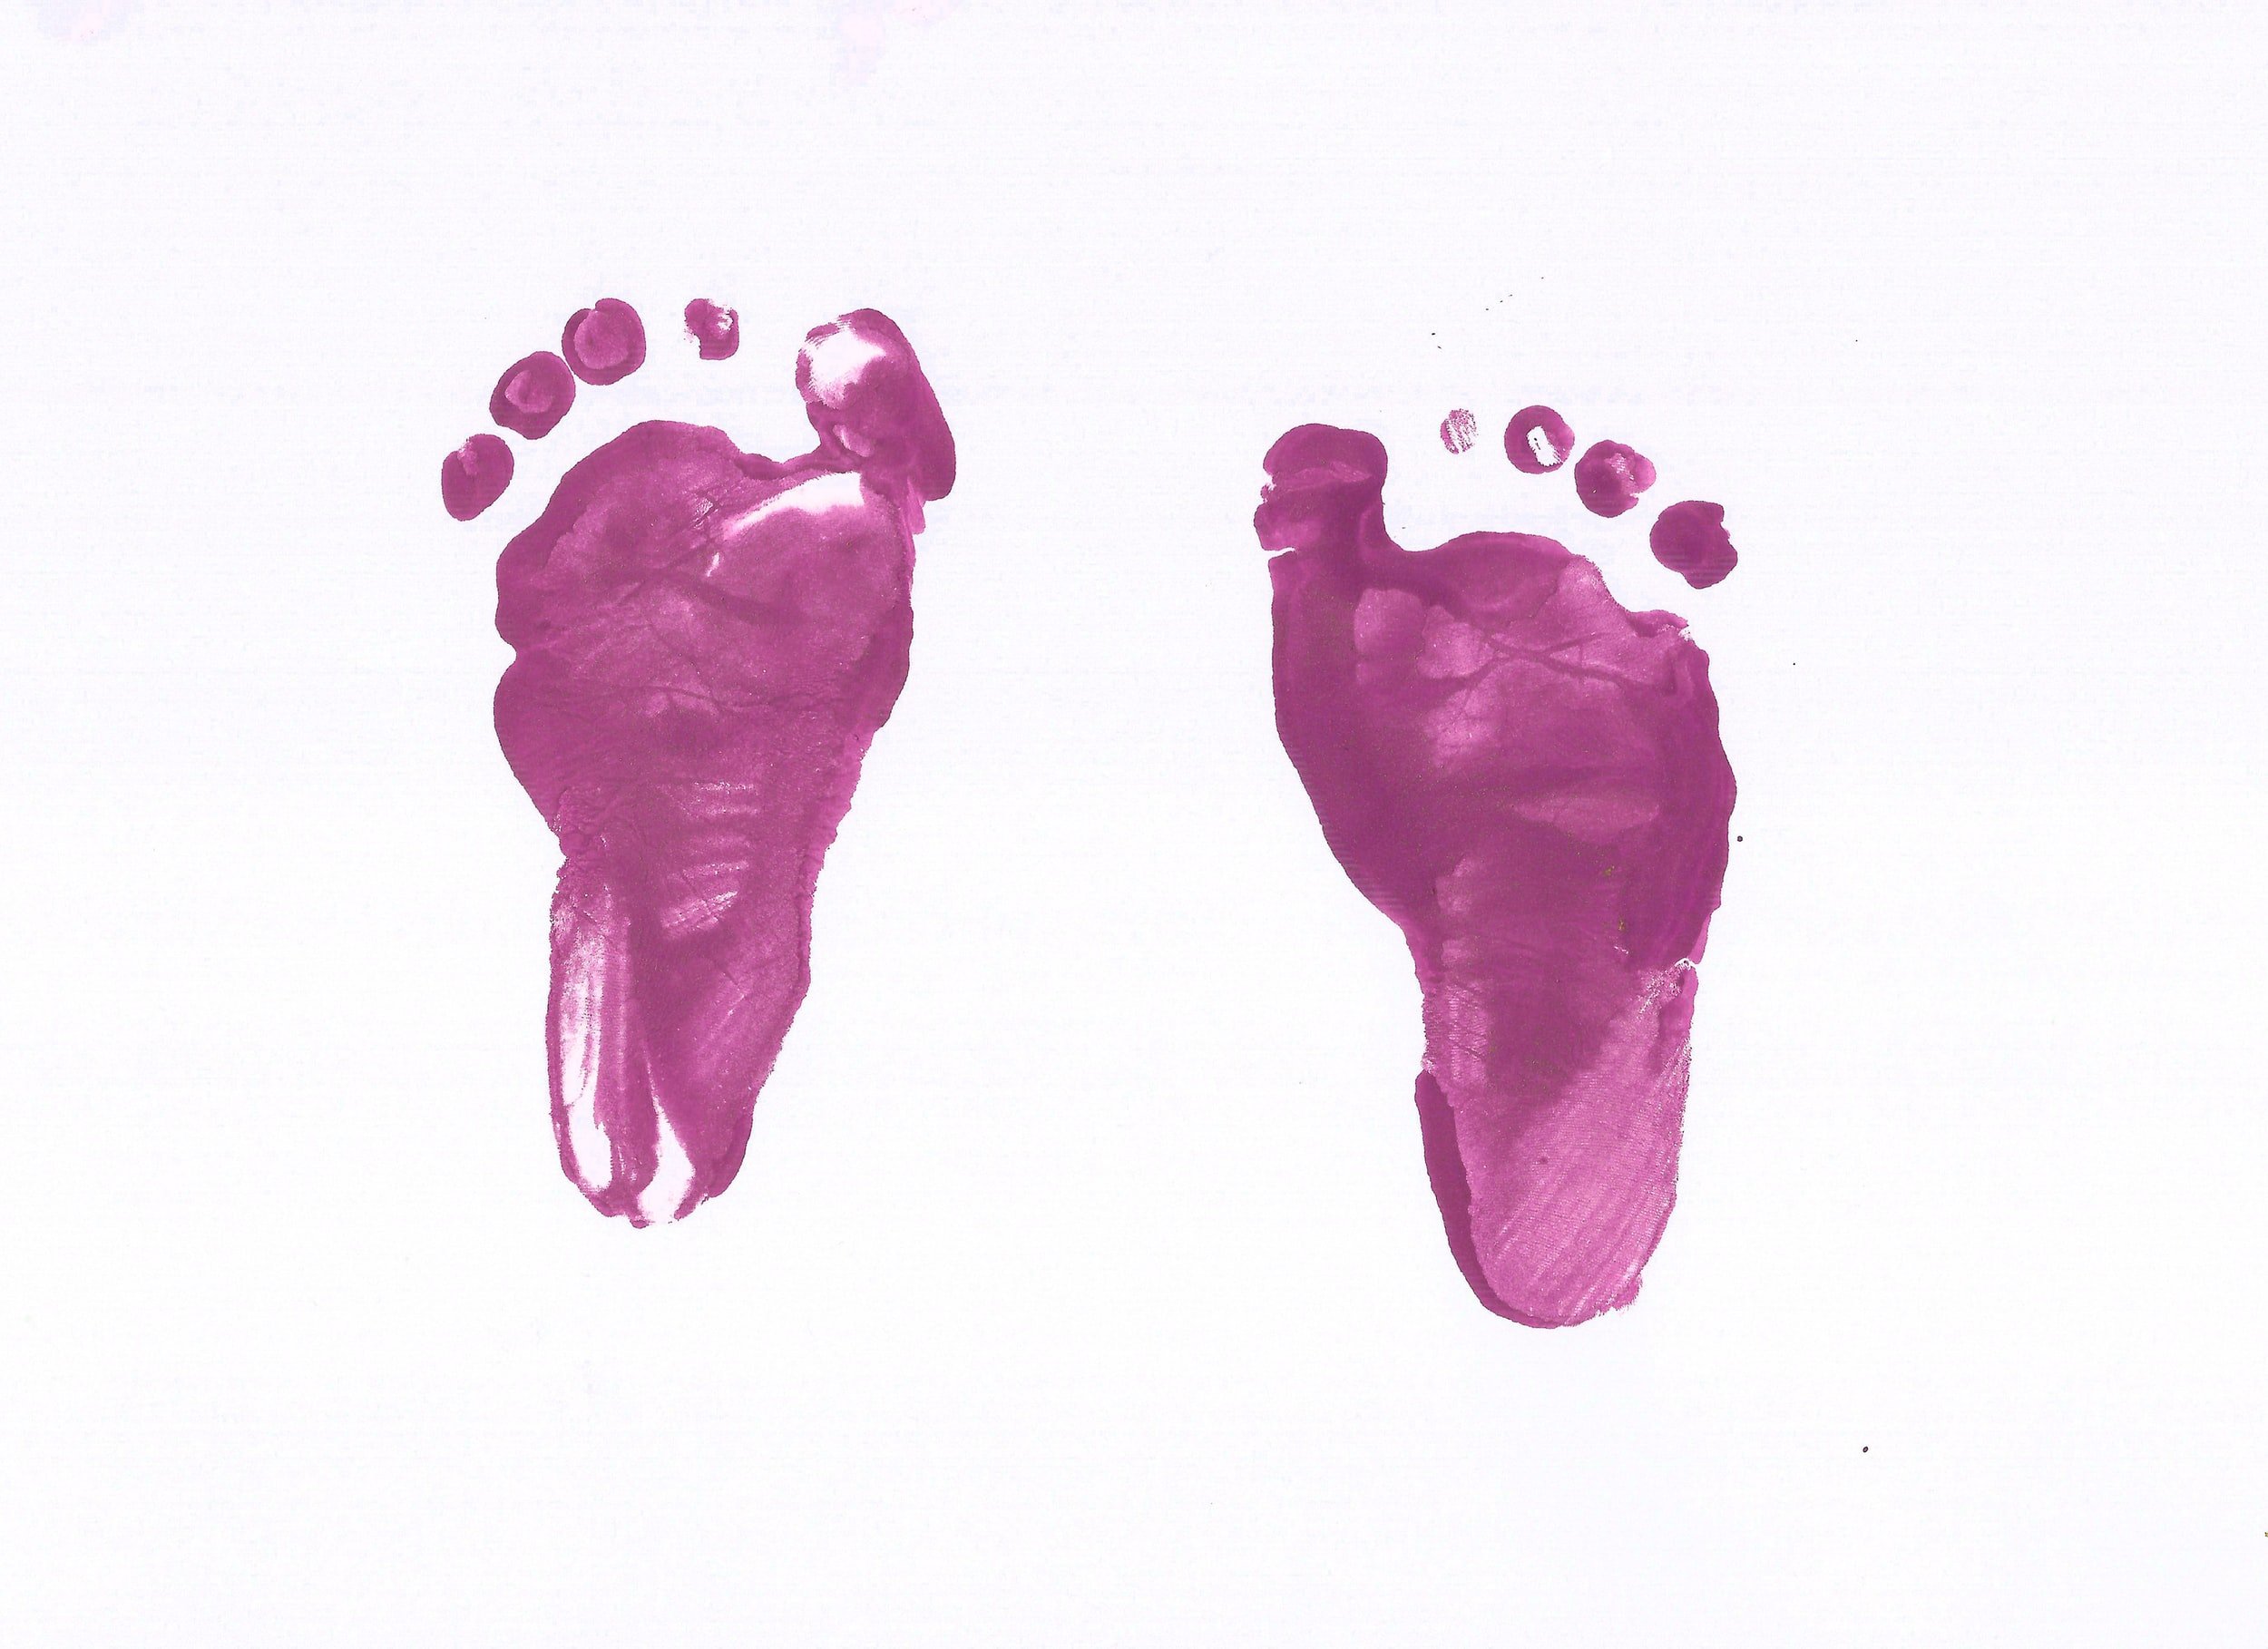 mother's day footprint craft